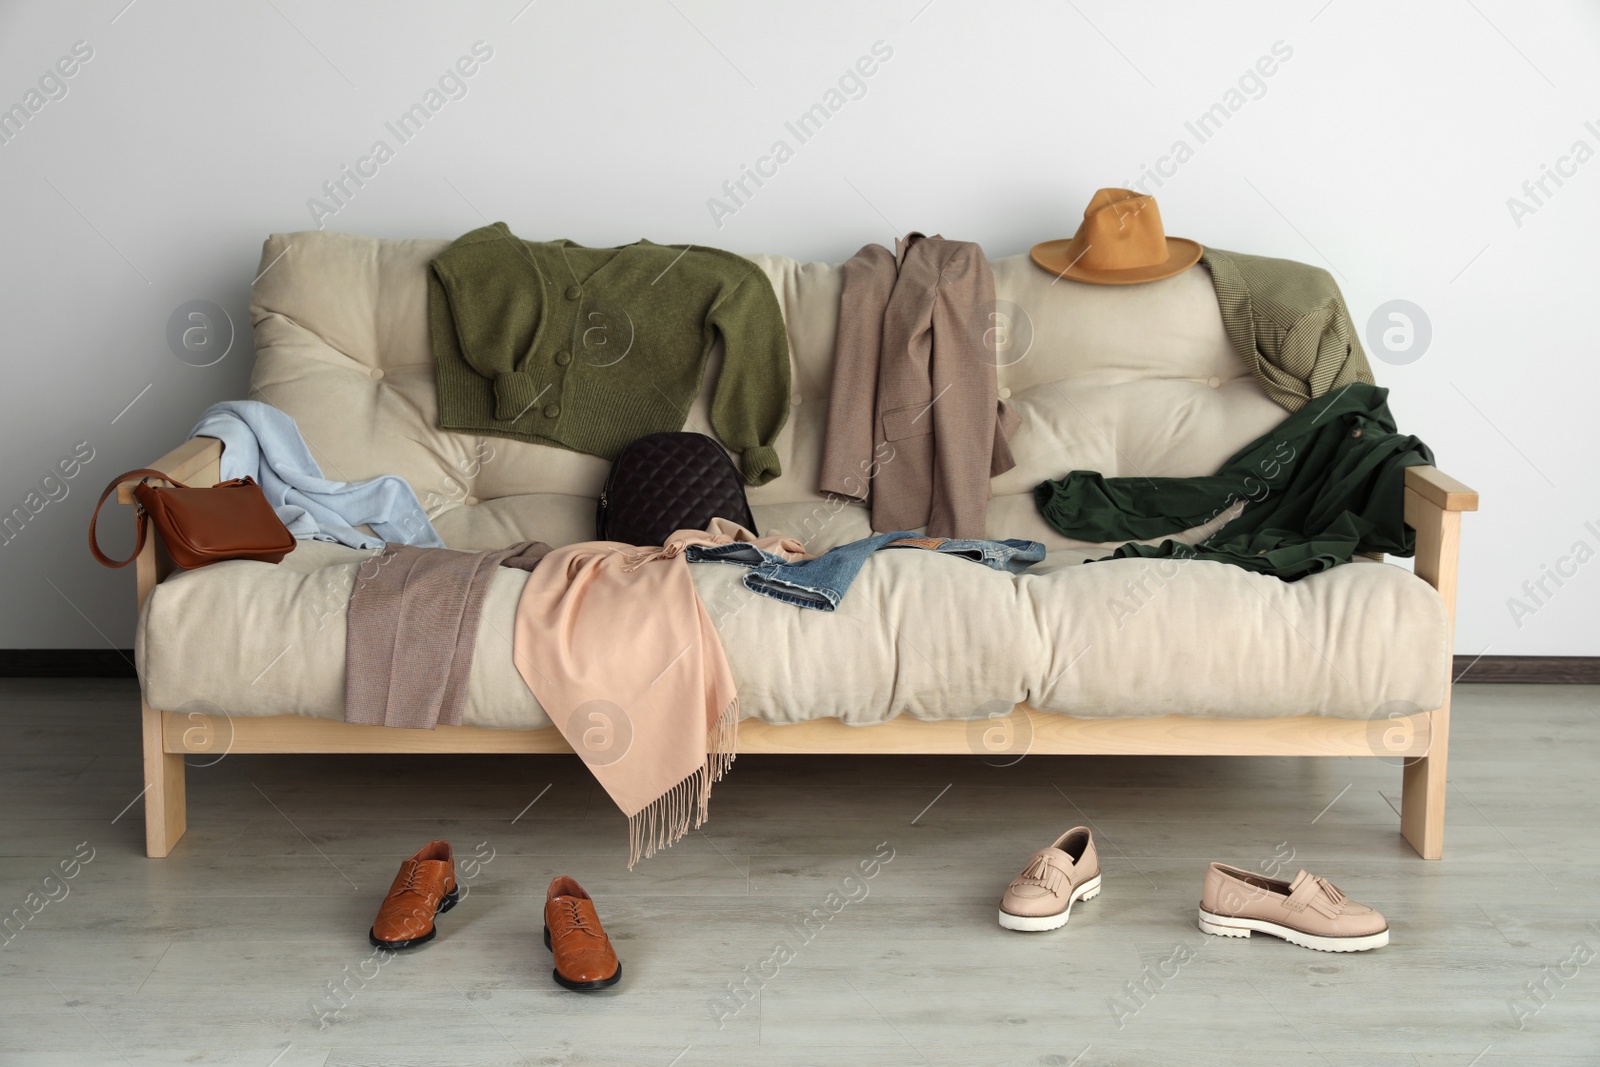 Photo of Messy pile of clothes and accessories on sofa in living room